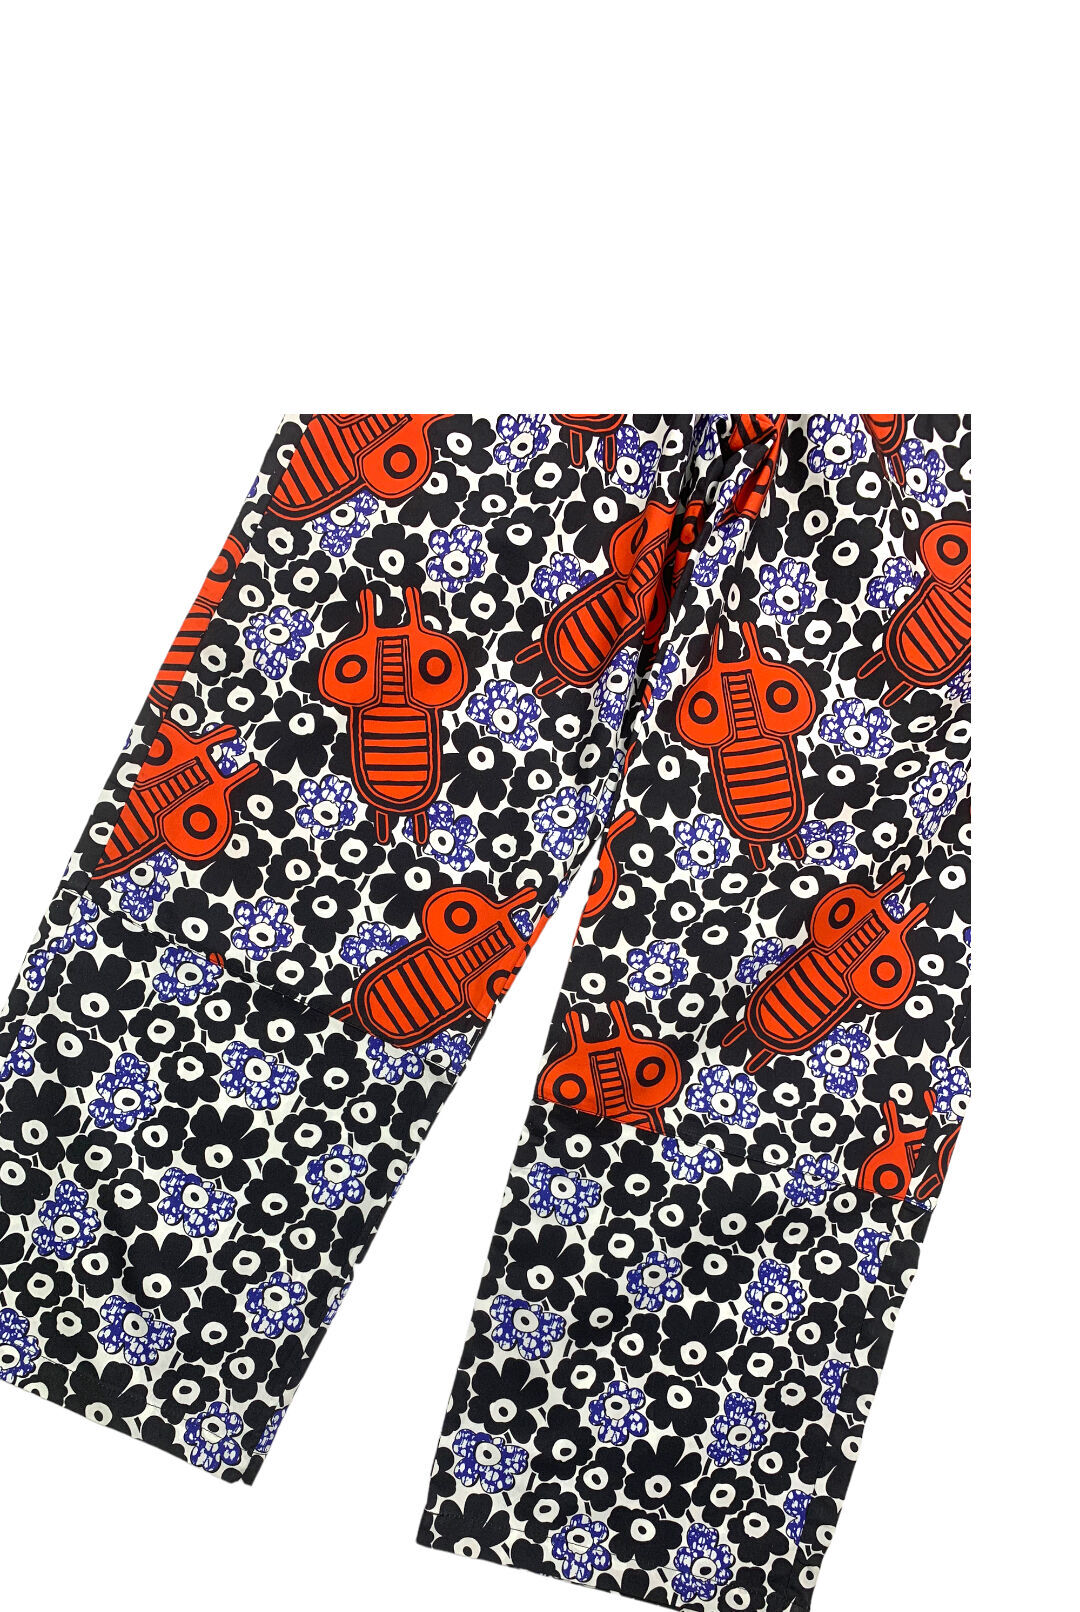 AFRICAN TWO PATTERN DESIGN PANTS